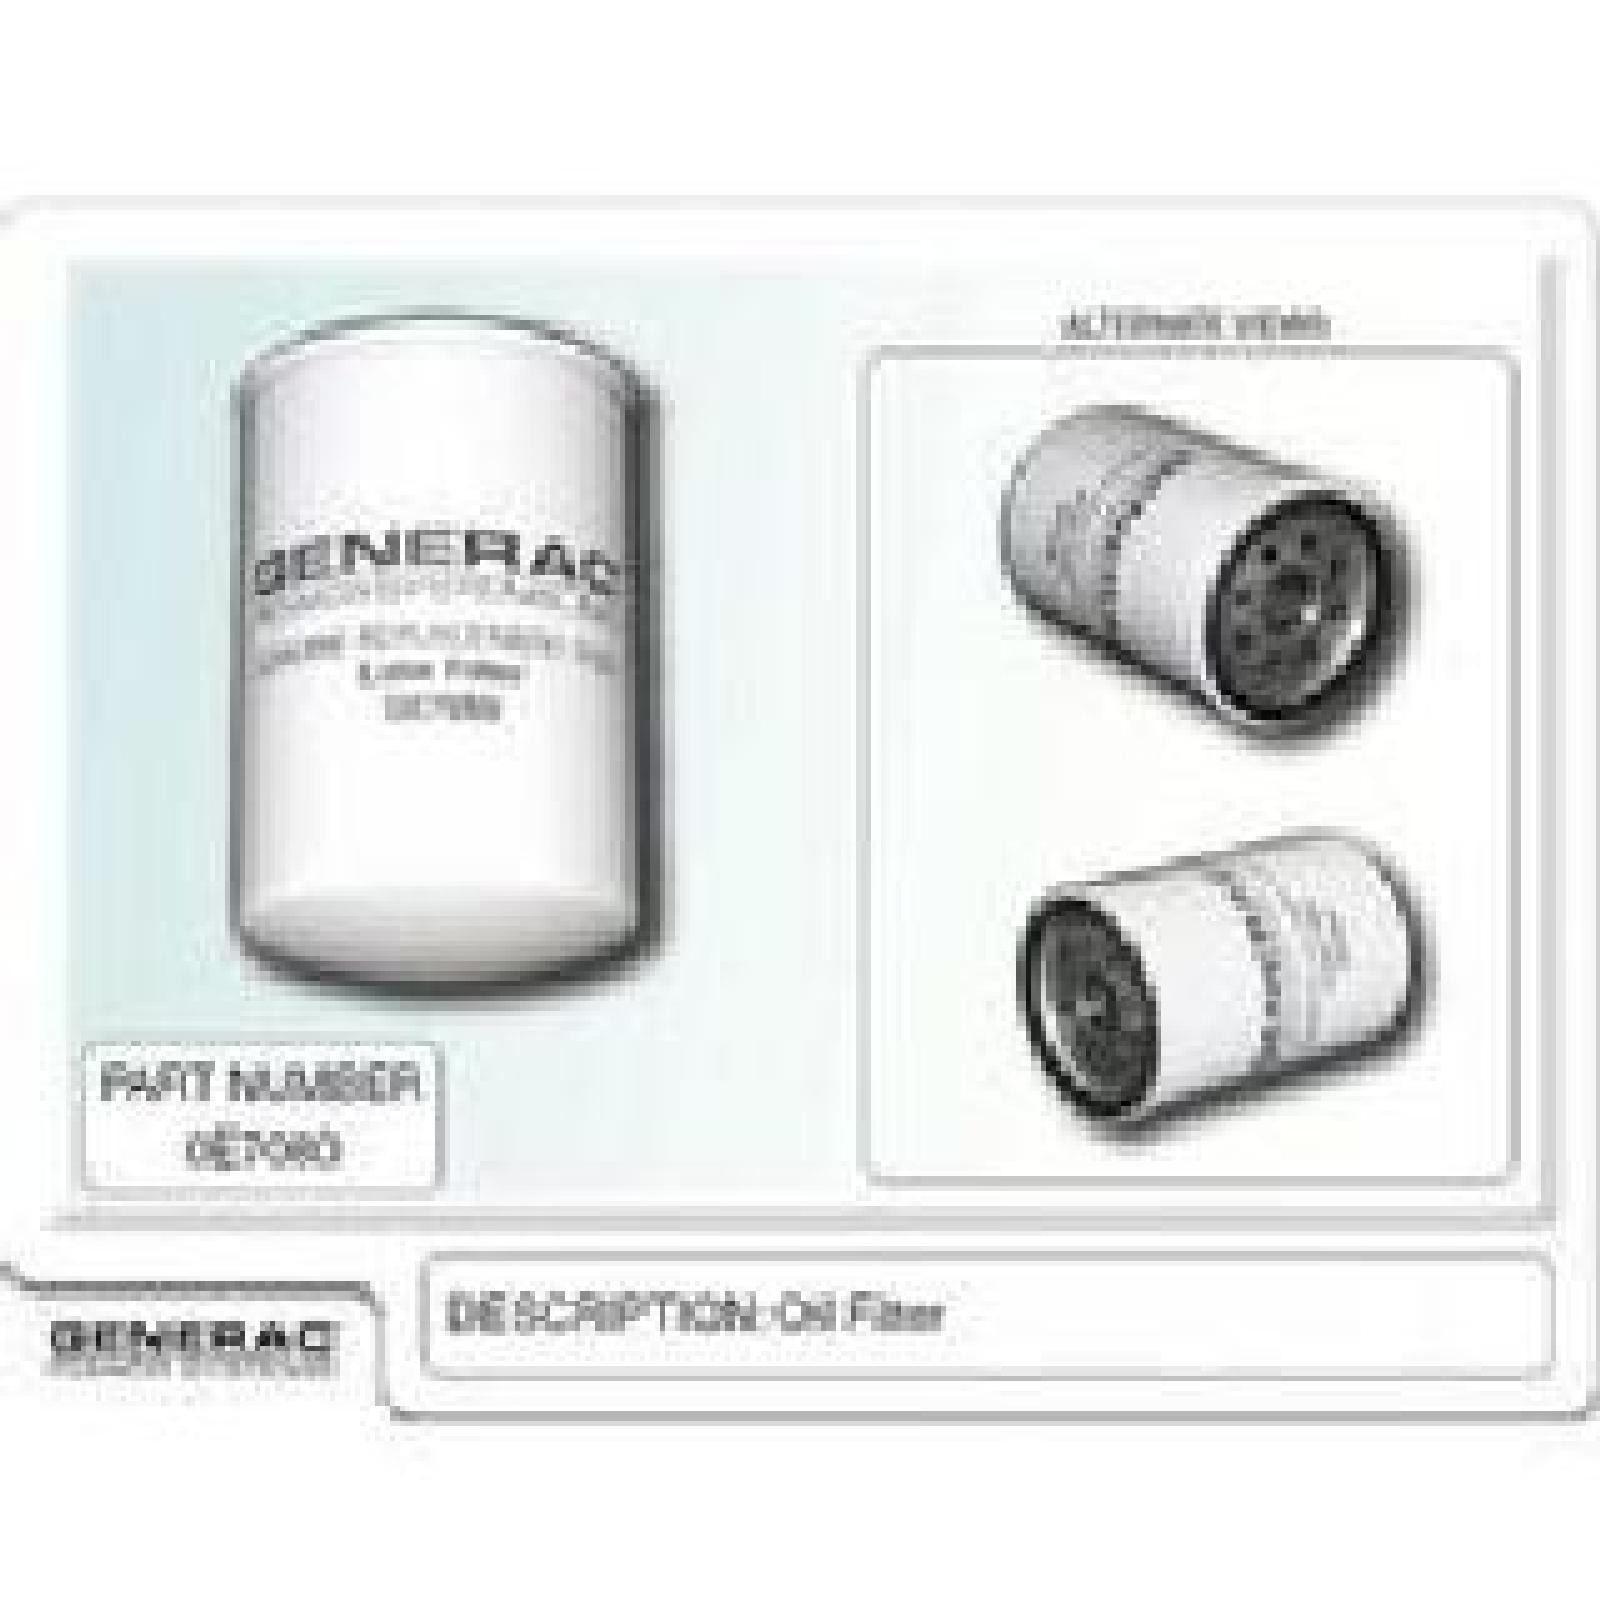 OIL FILTER 1.6 2.5 3.0 4. part# 0E7080 by Generac